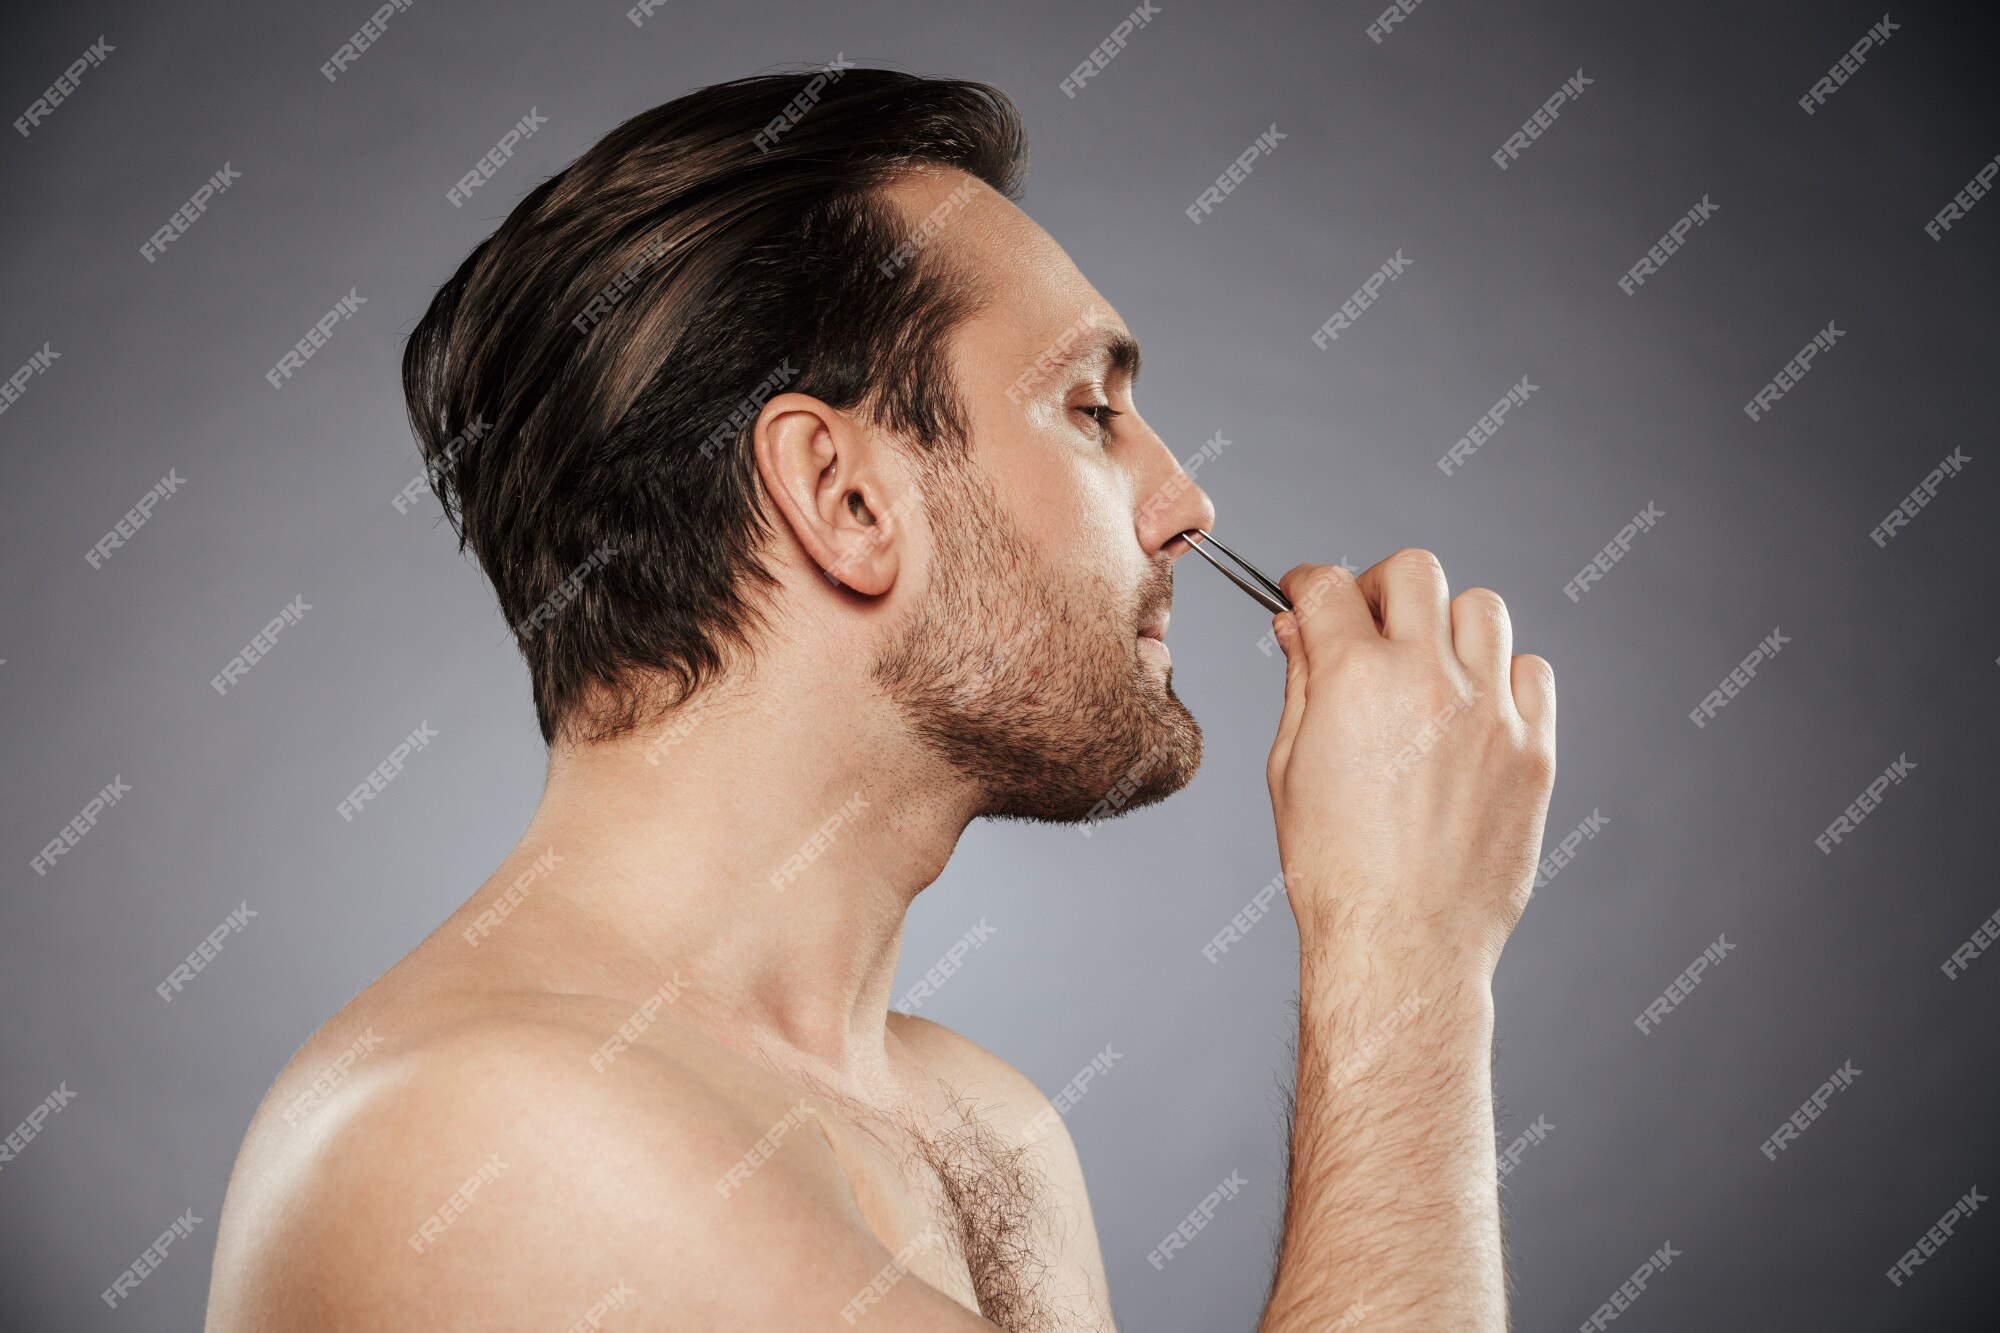 Premium Photo | Side view portrait of a handsome man removing nose hair